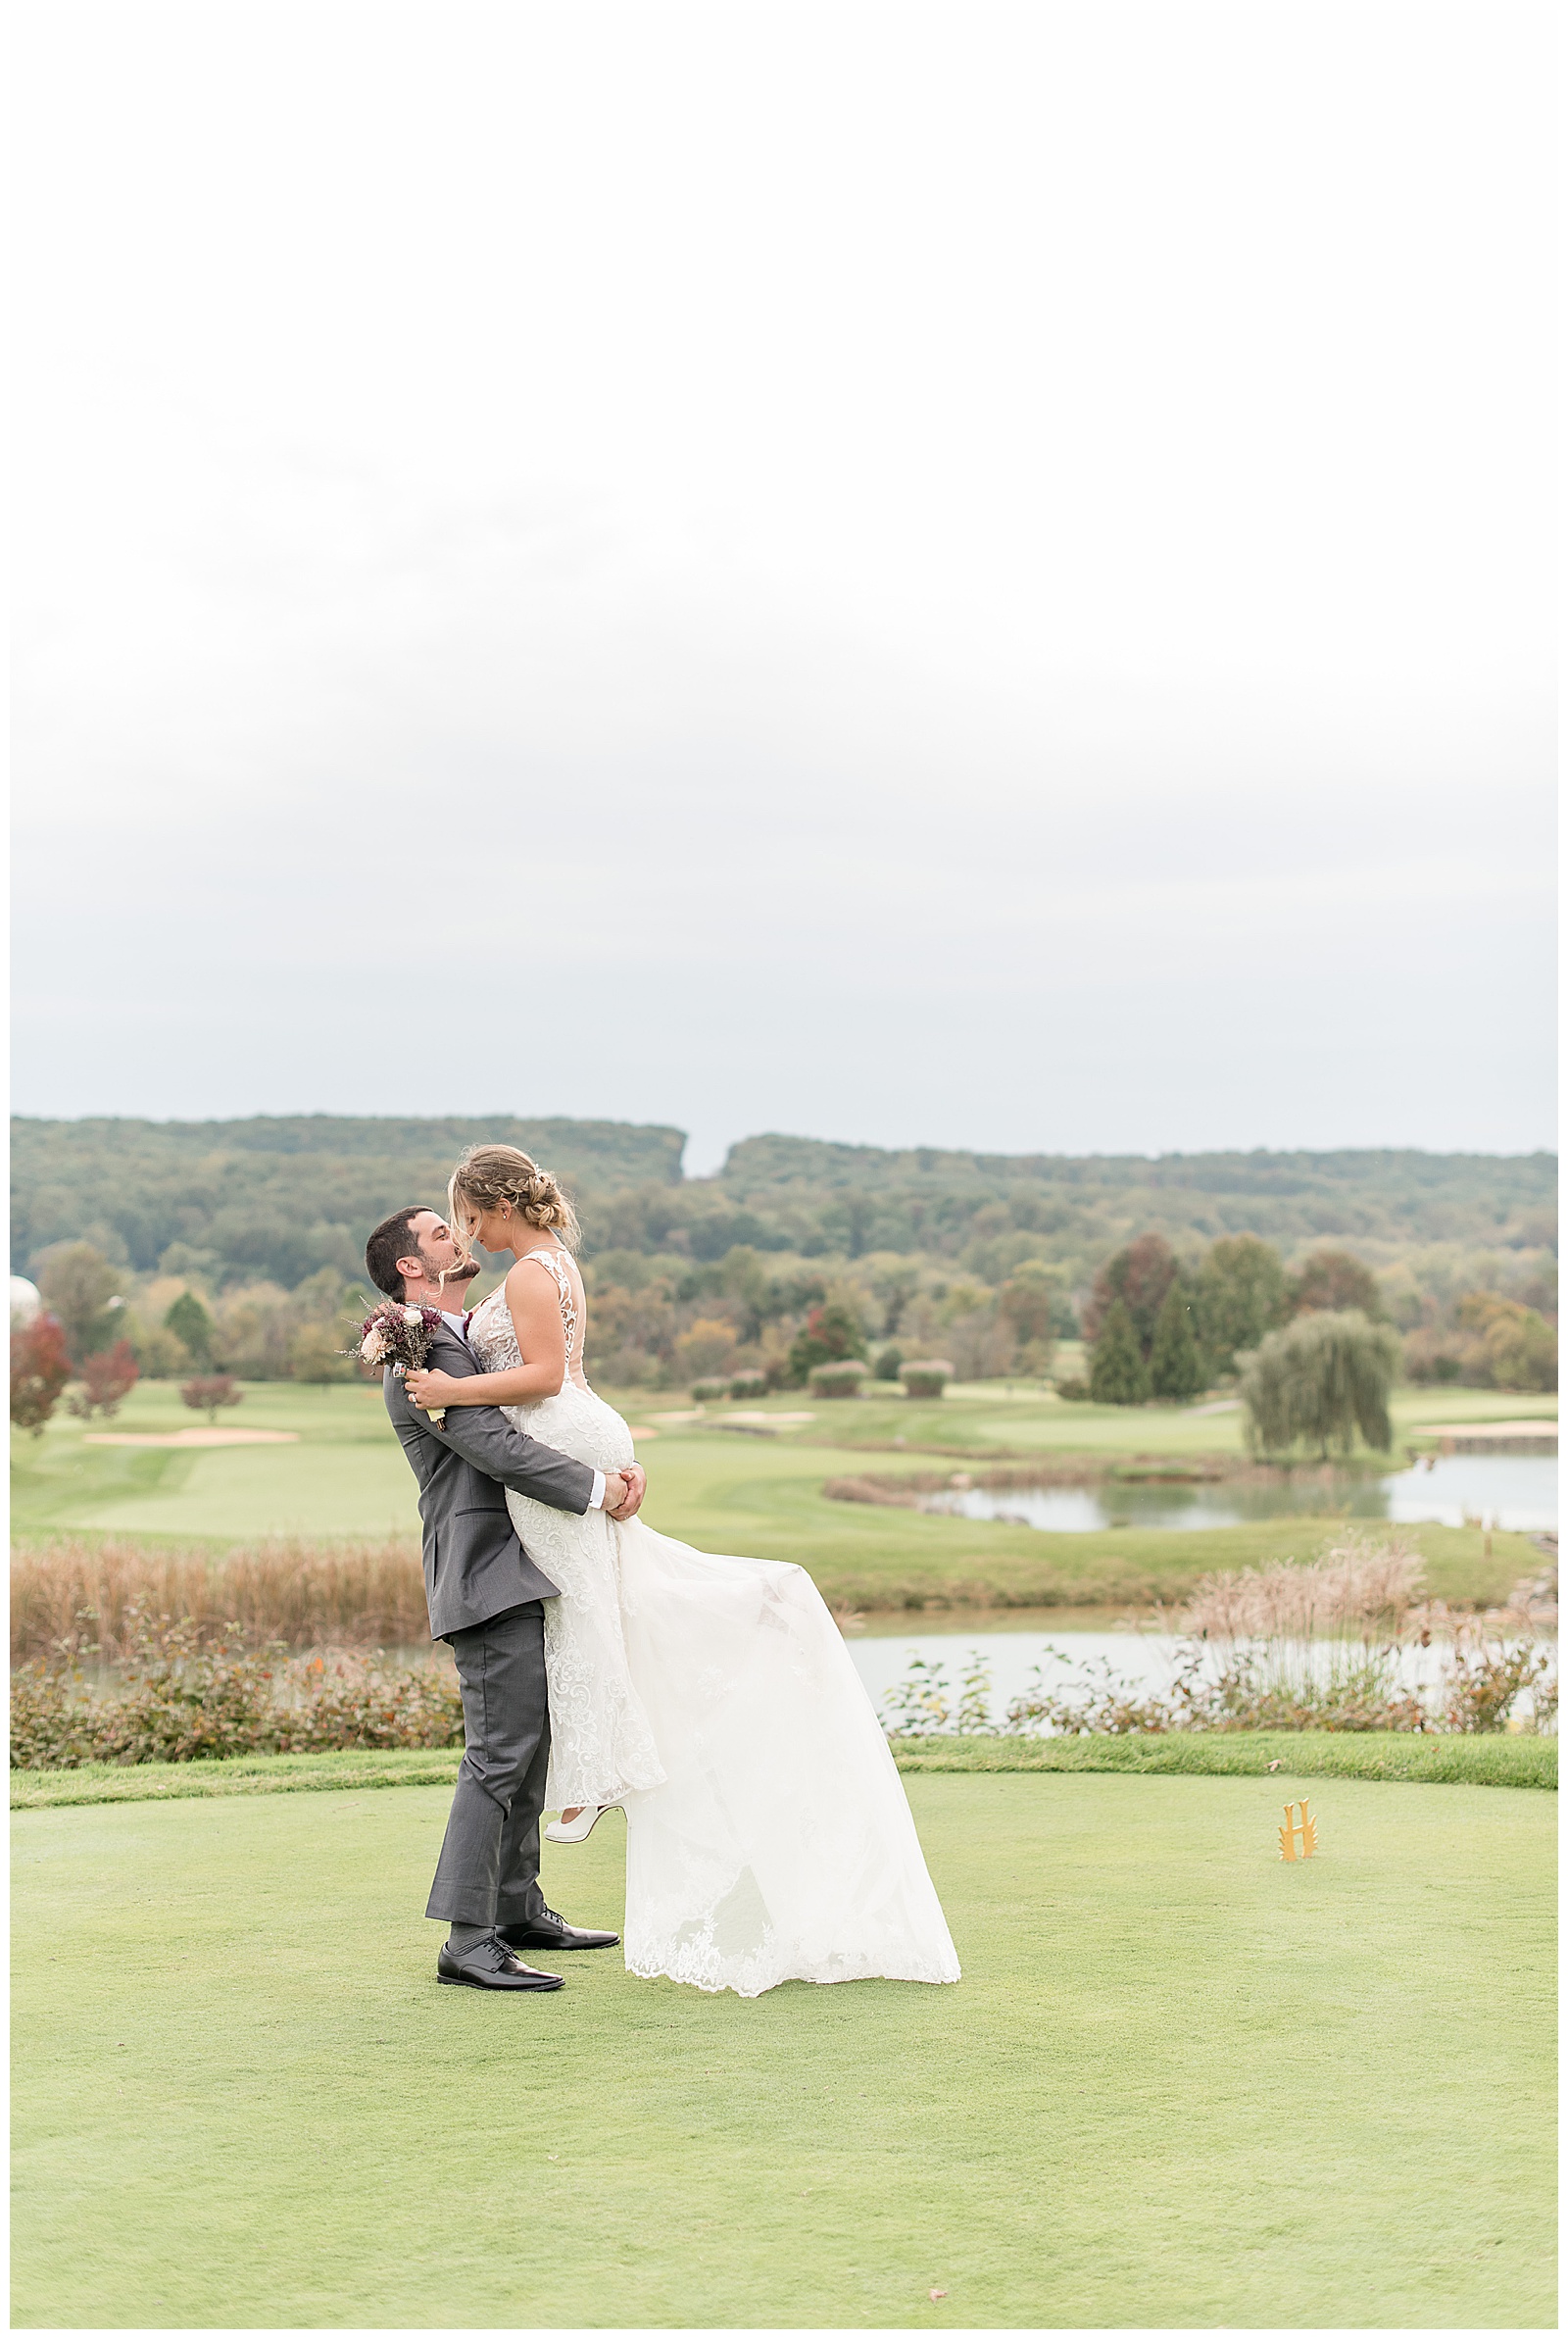 groom lifts bride while kissing on golf course at hayfields country club in maryland